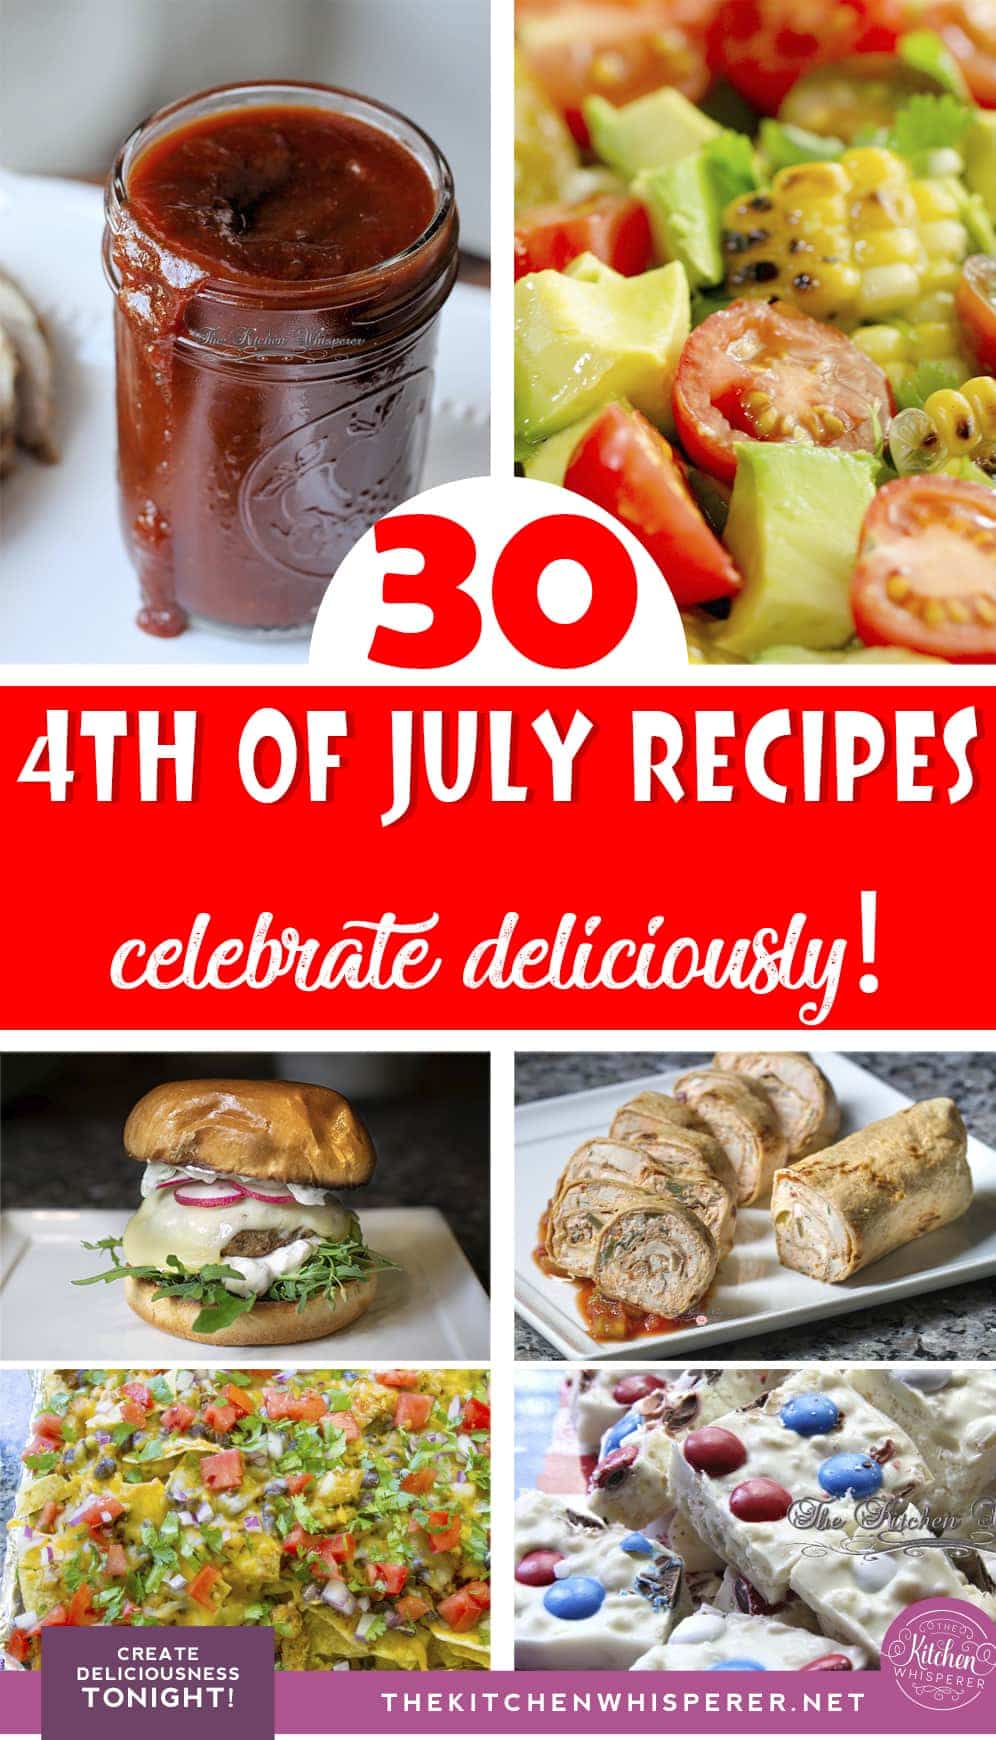 30 Recipes to Celebrate the 4th of July Deliciously!